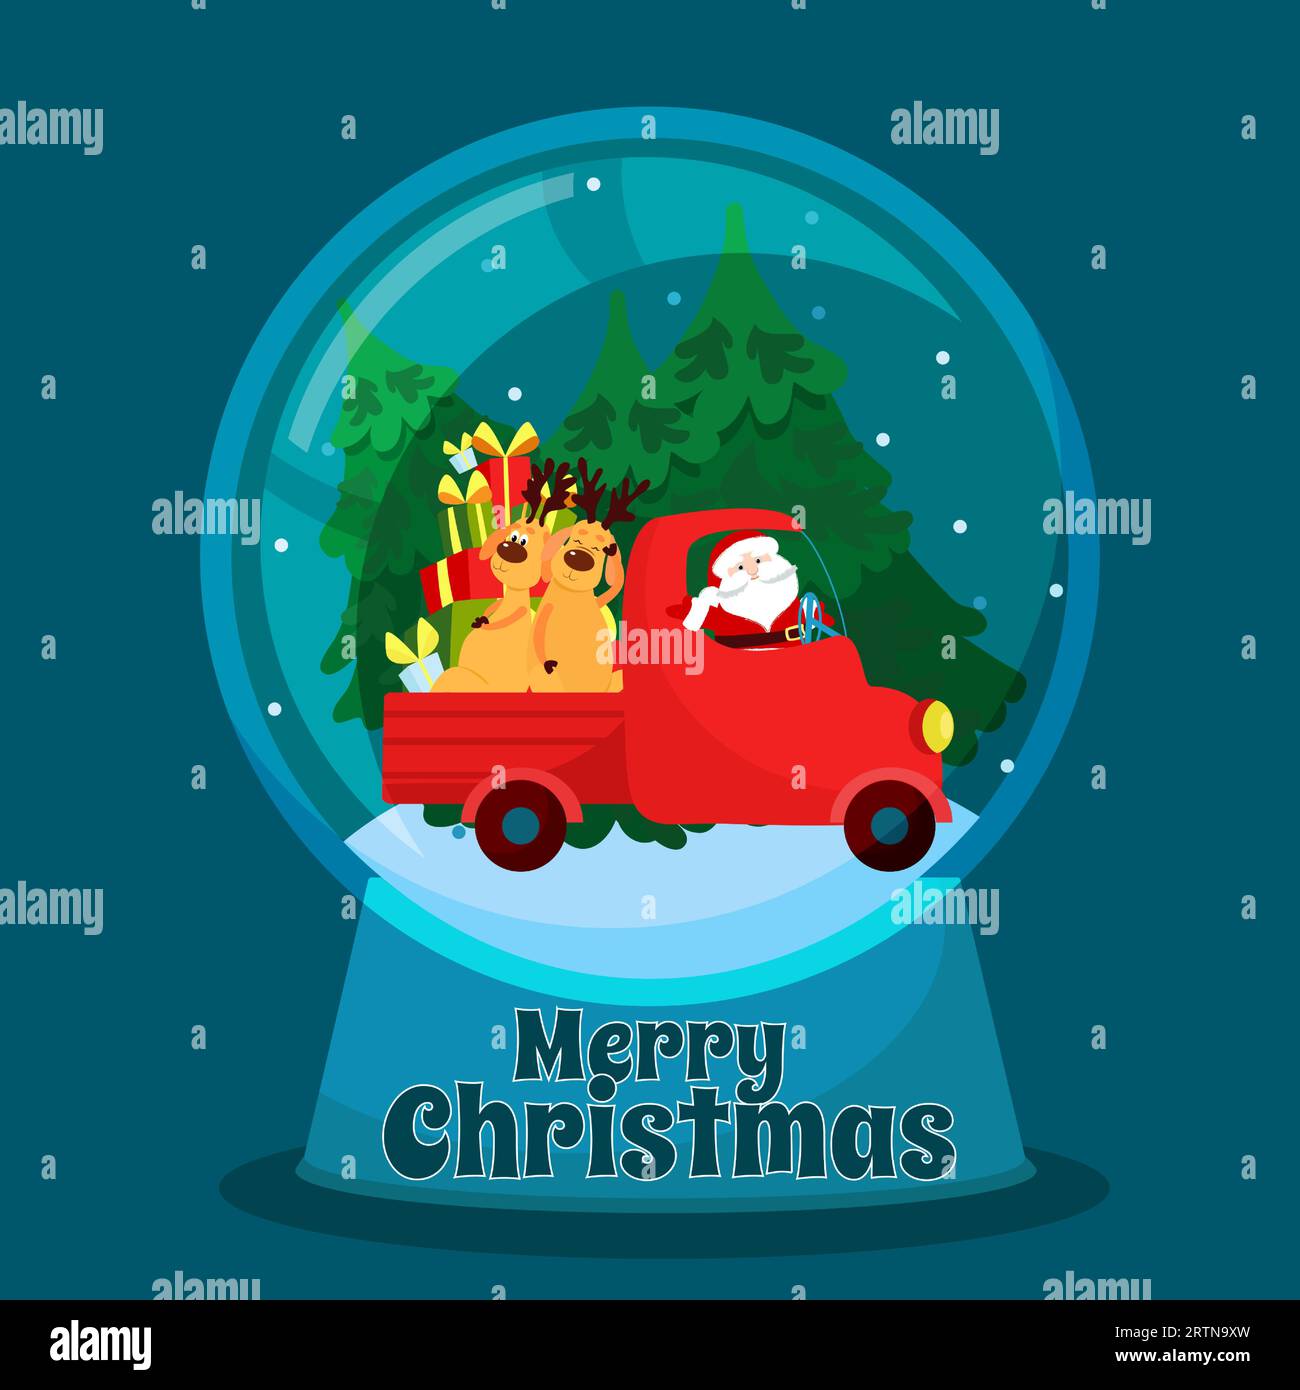 Santa Claus is driving a truck carrying reindeer and a fir tree. Christmas scene in a glass bowl.Christmas greeting vector card. Stock Vector